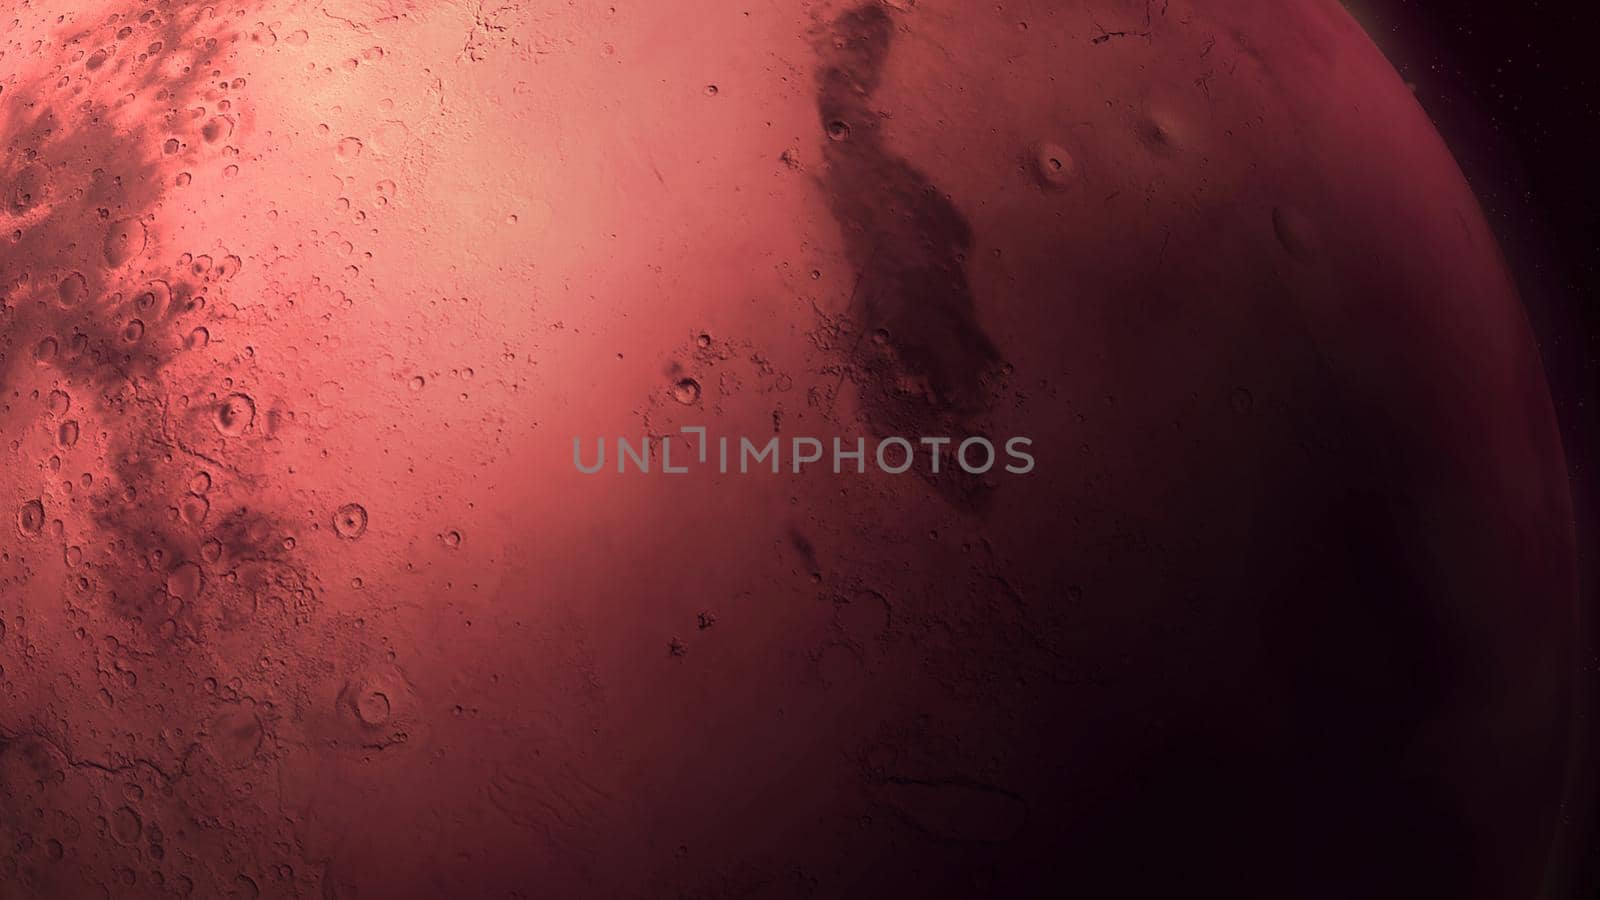 A close up image of Mars: surface of the red planet.